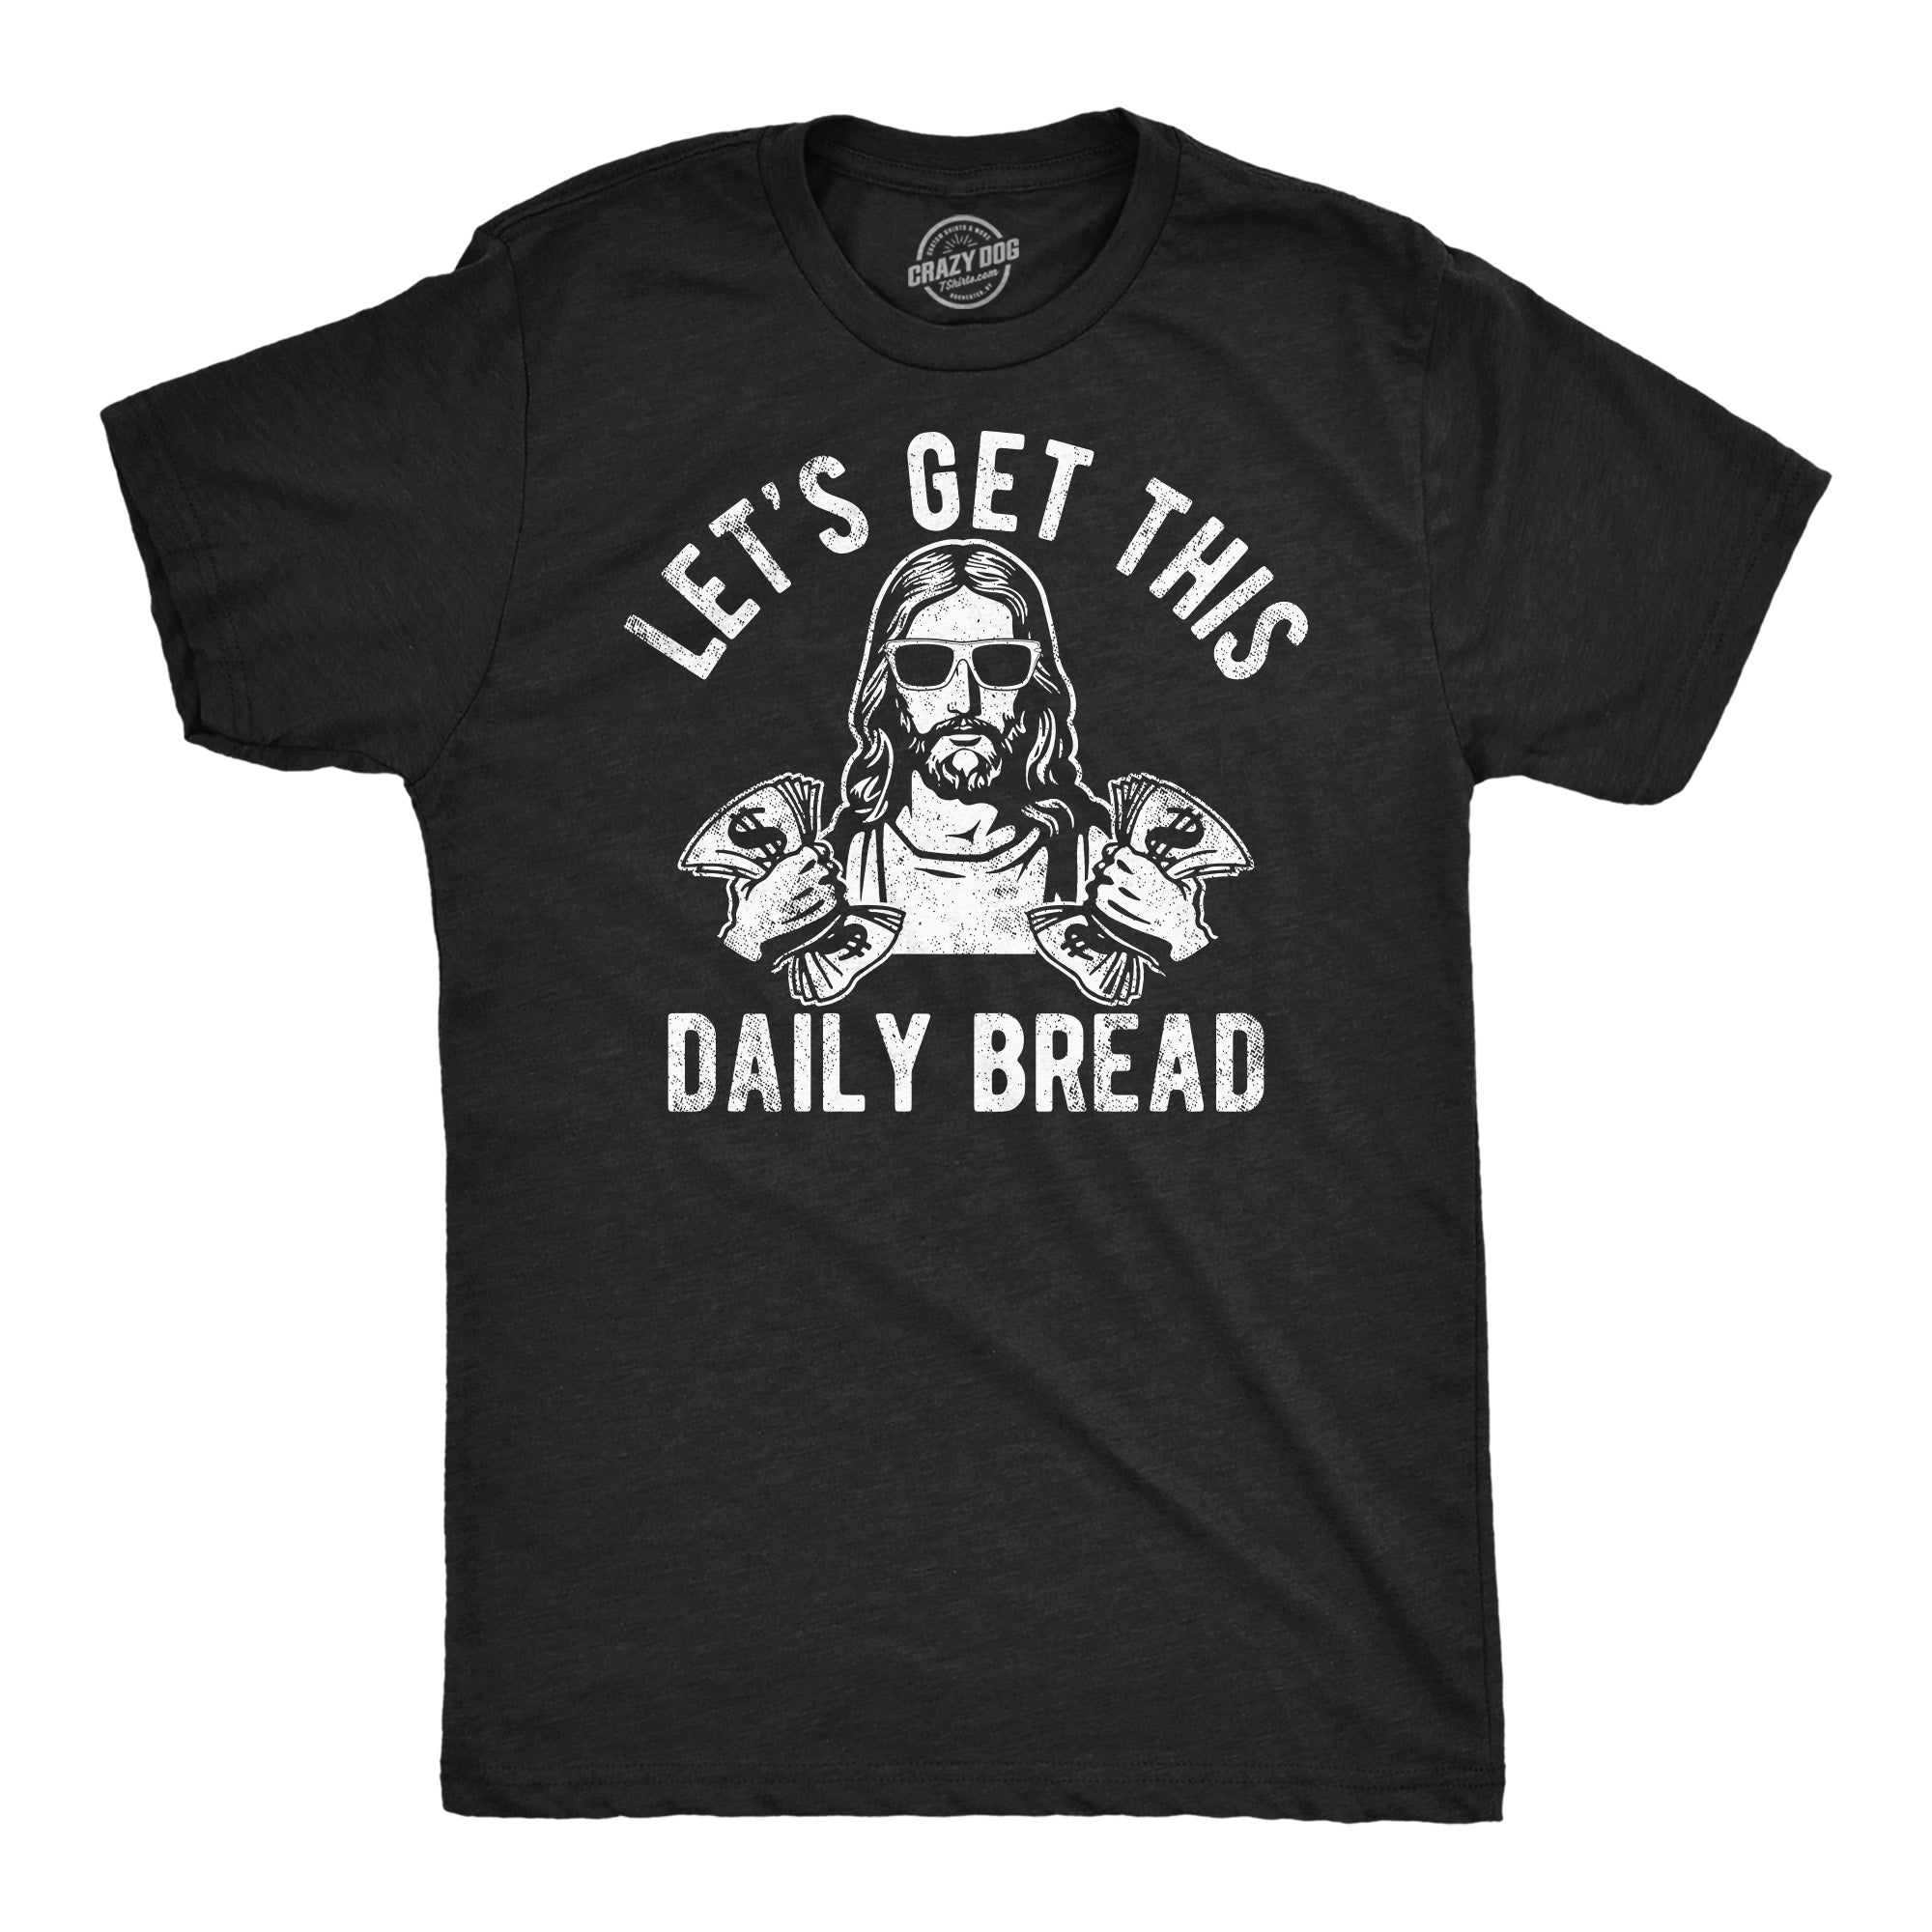 Funny Heather Black - Lets Get This Daily Bread Lets Get This Daily Bread Mens T Shirt Nerdy Easter sarcastic Religion Tee